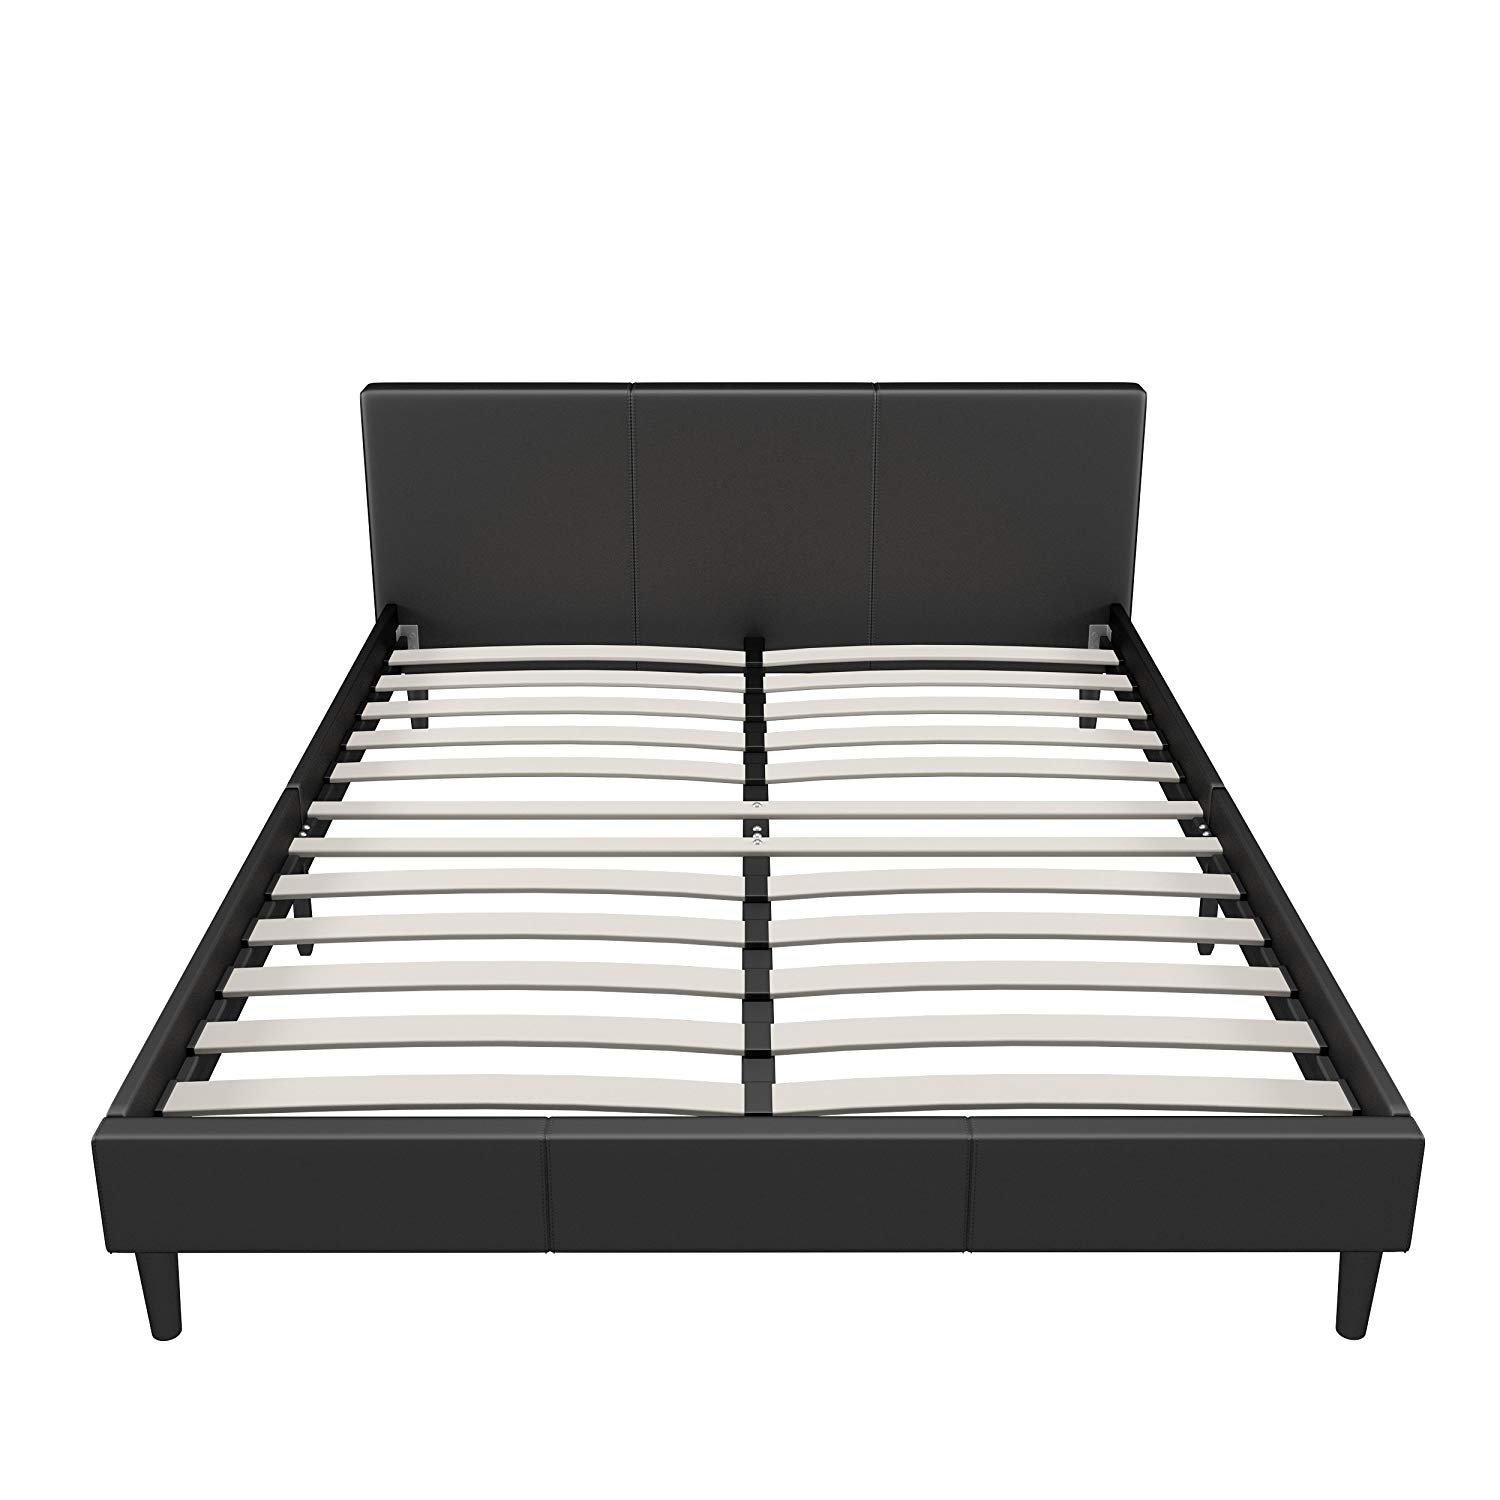 queen platform bed frame with headboard amazon.com: manhattan queen bed frame | modern style low profile ROTQYEL